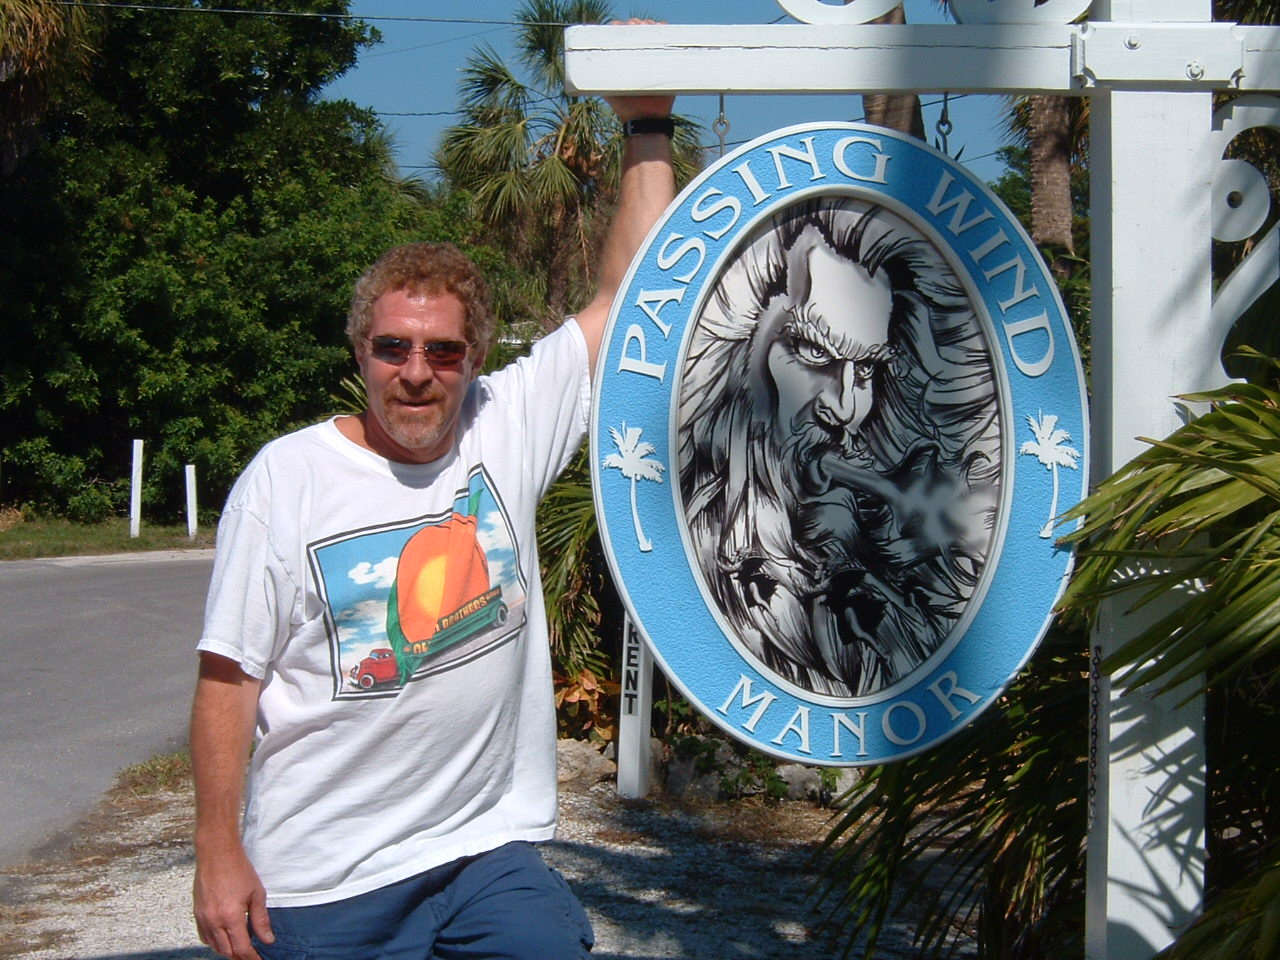 Found this incredible sign on Anna Maria Island while we were there for the Blues Festival.